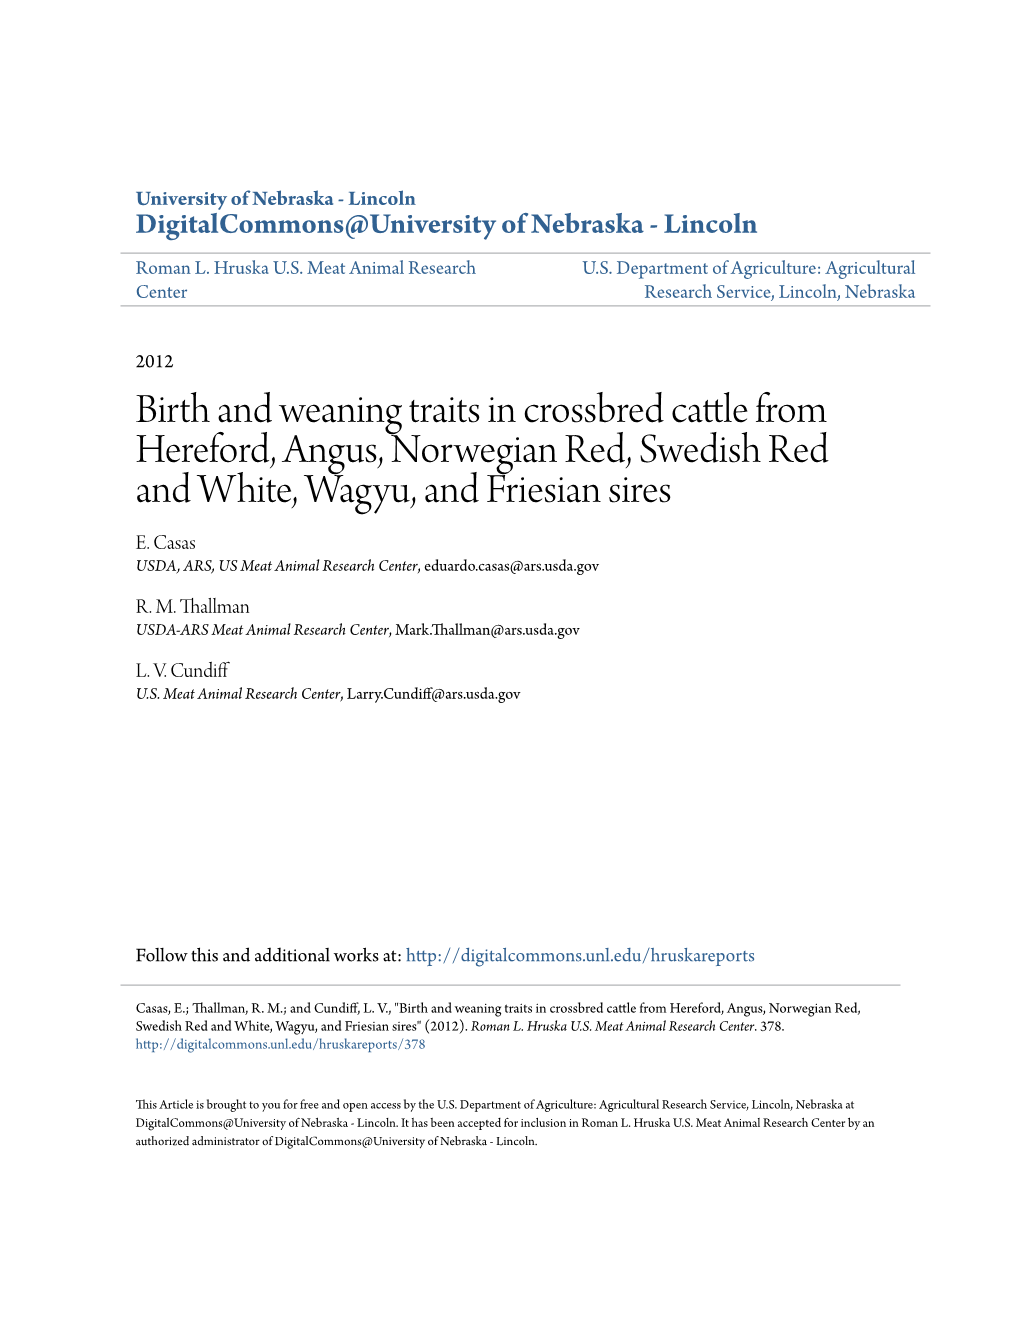 Birth and Weaning Traits in Crossbred Cattle from Hereford, Angus, Norwegian Red, Swedish Red and White, Wagyu, and Friesian Sires E